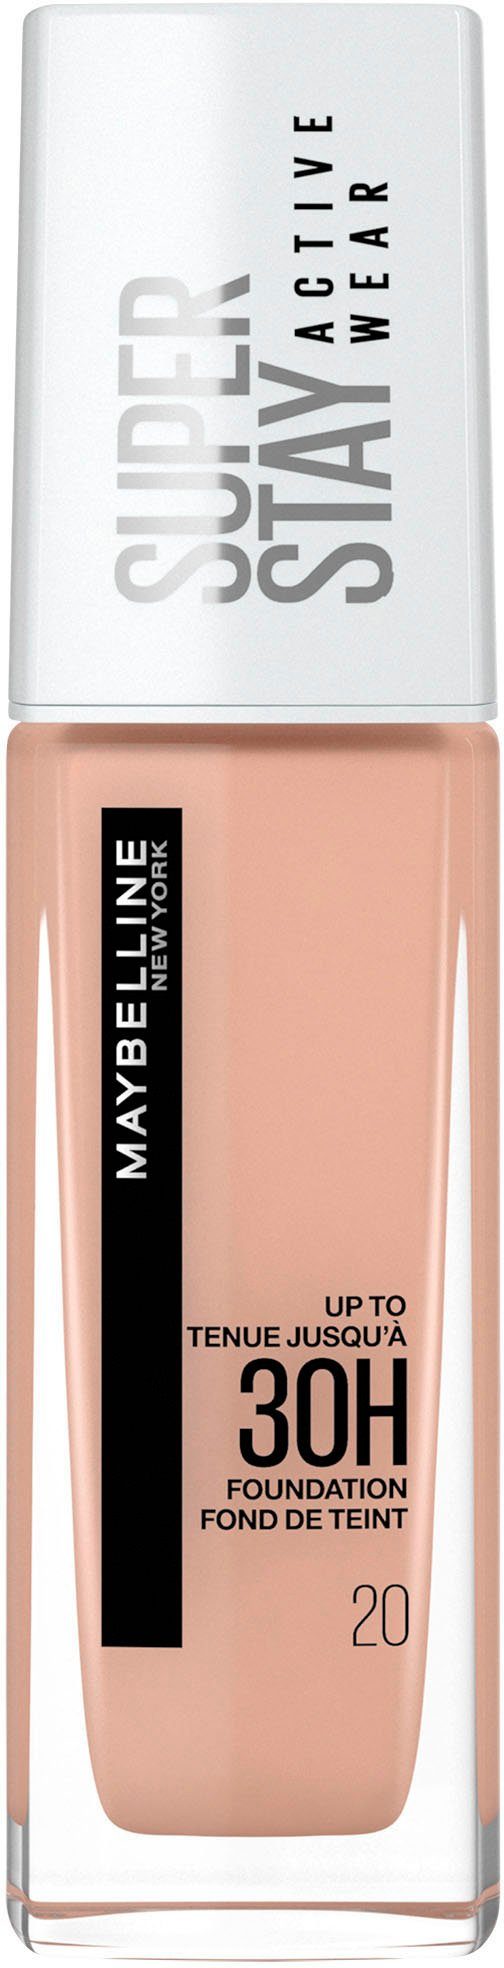 Stay Wear Foundation Active Super Cameo 20 YORK MAYBELLINE NEW